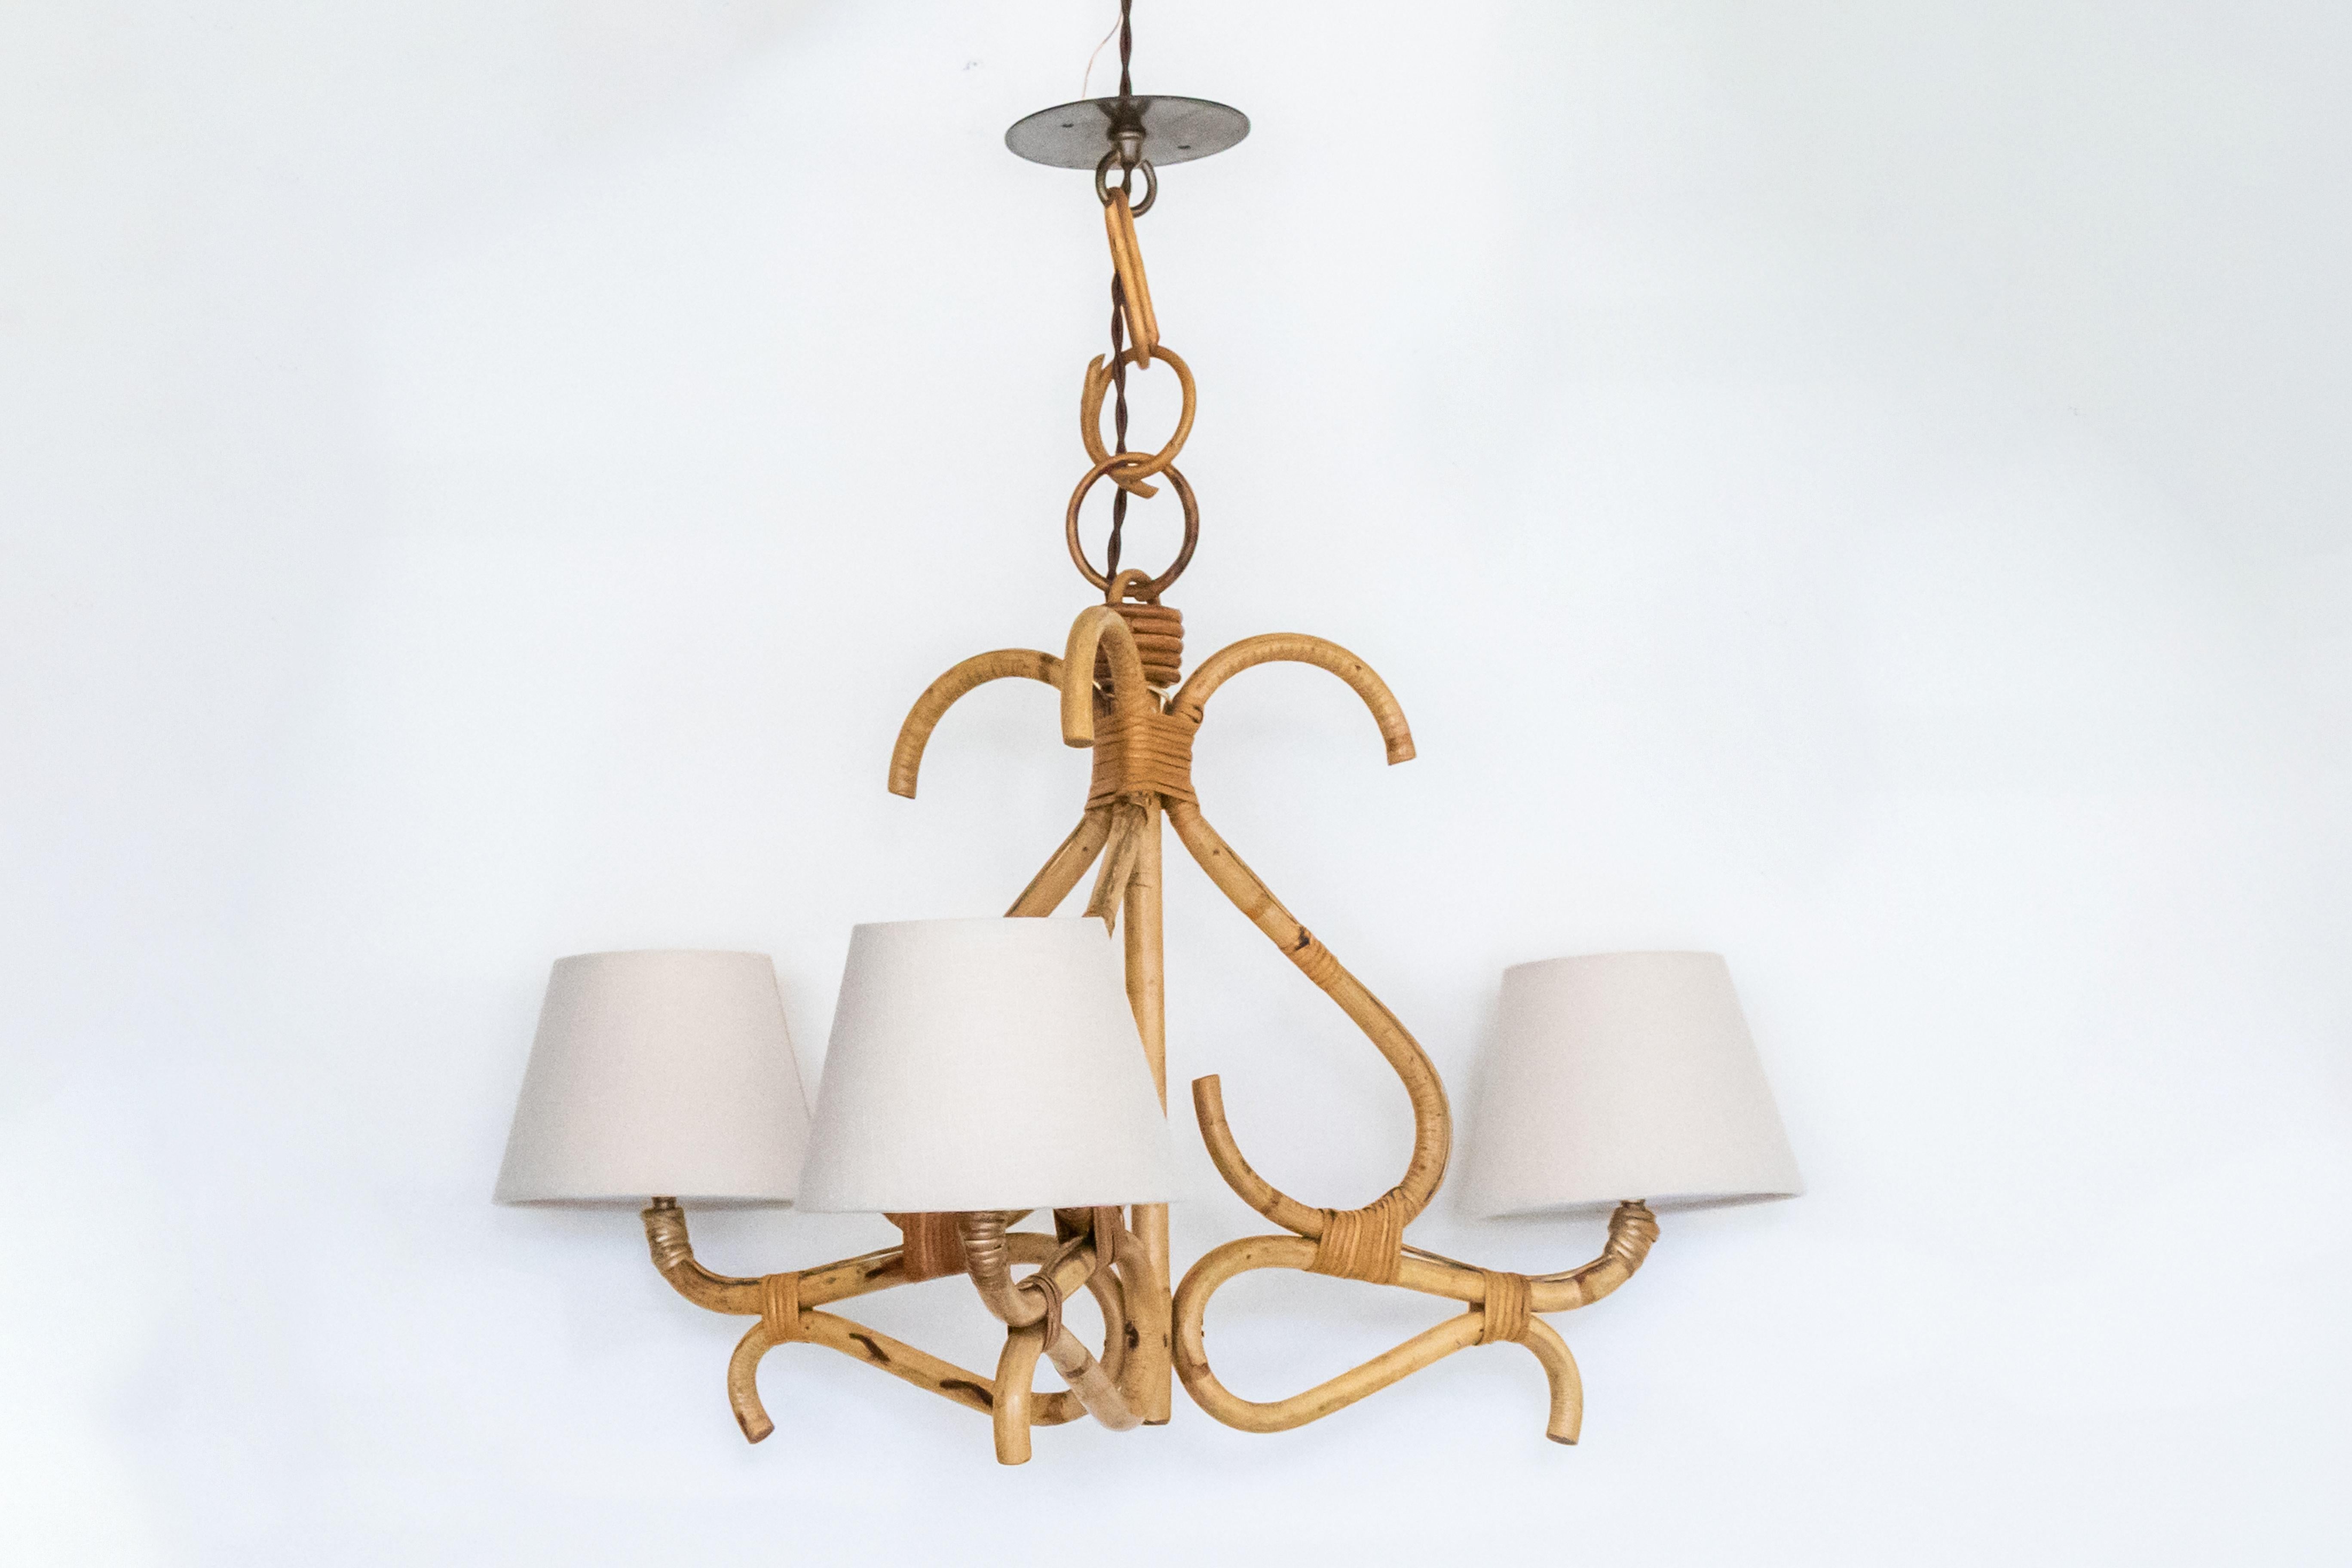 French rattan chandelier with three lights. Original rattan in decorative shape and original finish. Newly re-wired and new linen shades. 

Measures: Overall height 24.25